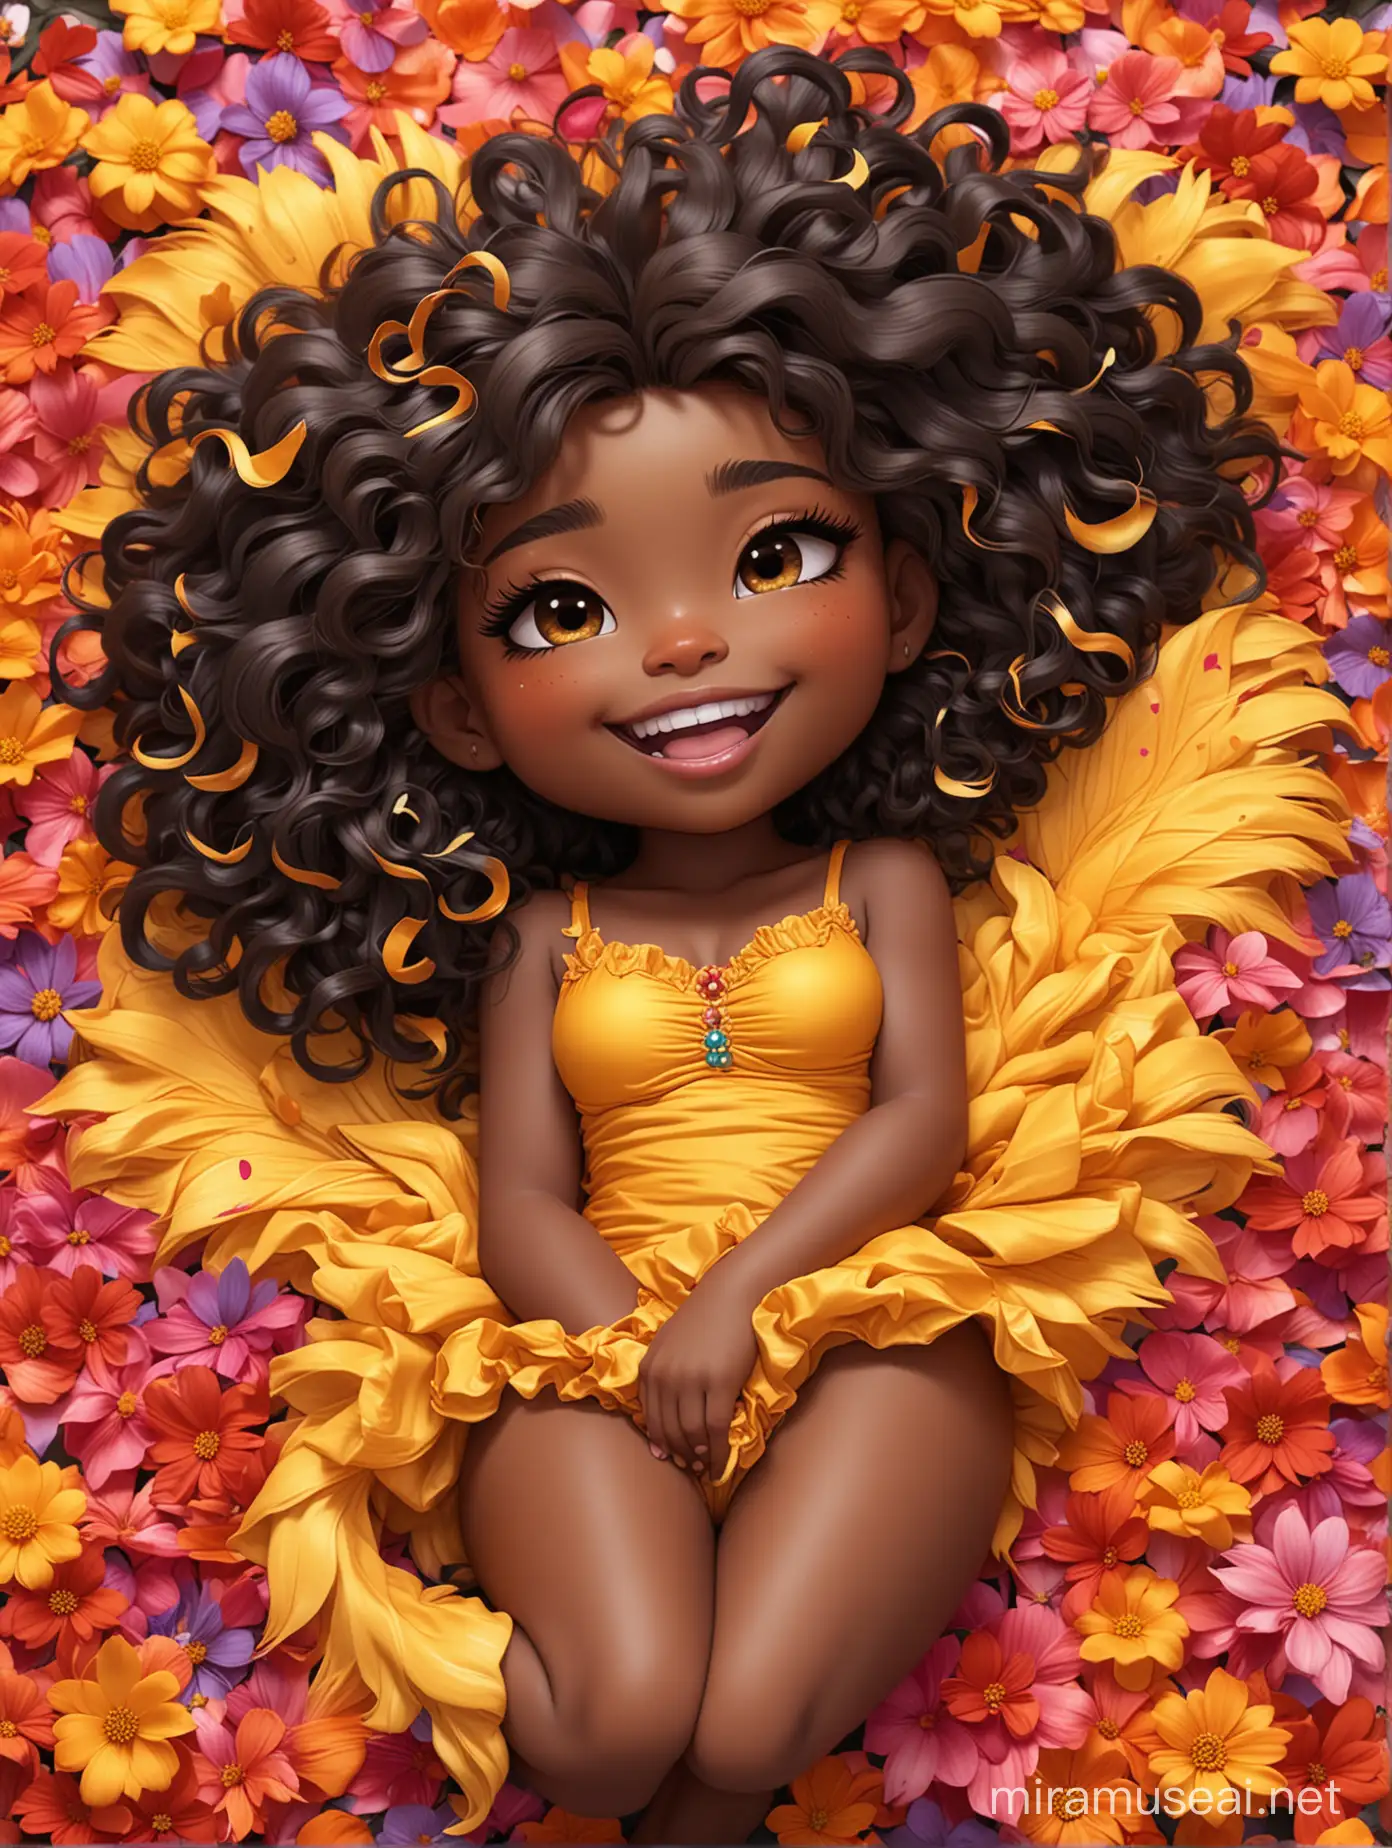 Chibi Black Girl with Playful Lion Tail Surrounded by Colorful Flowers